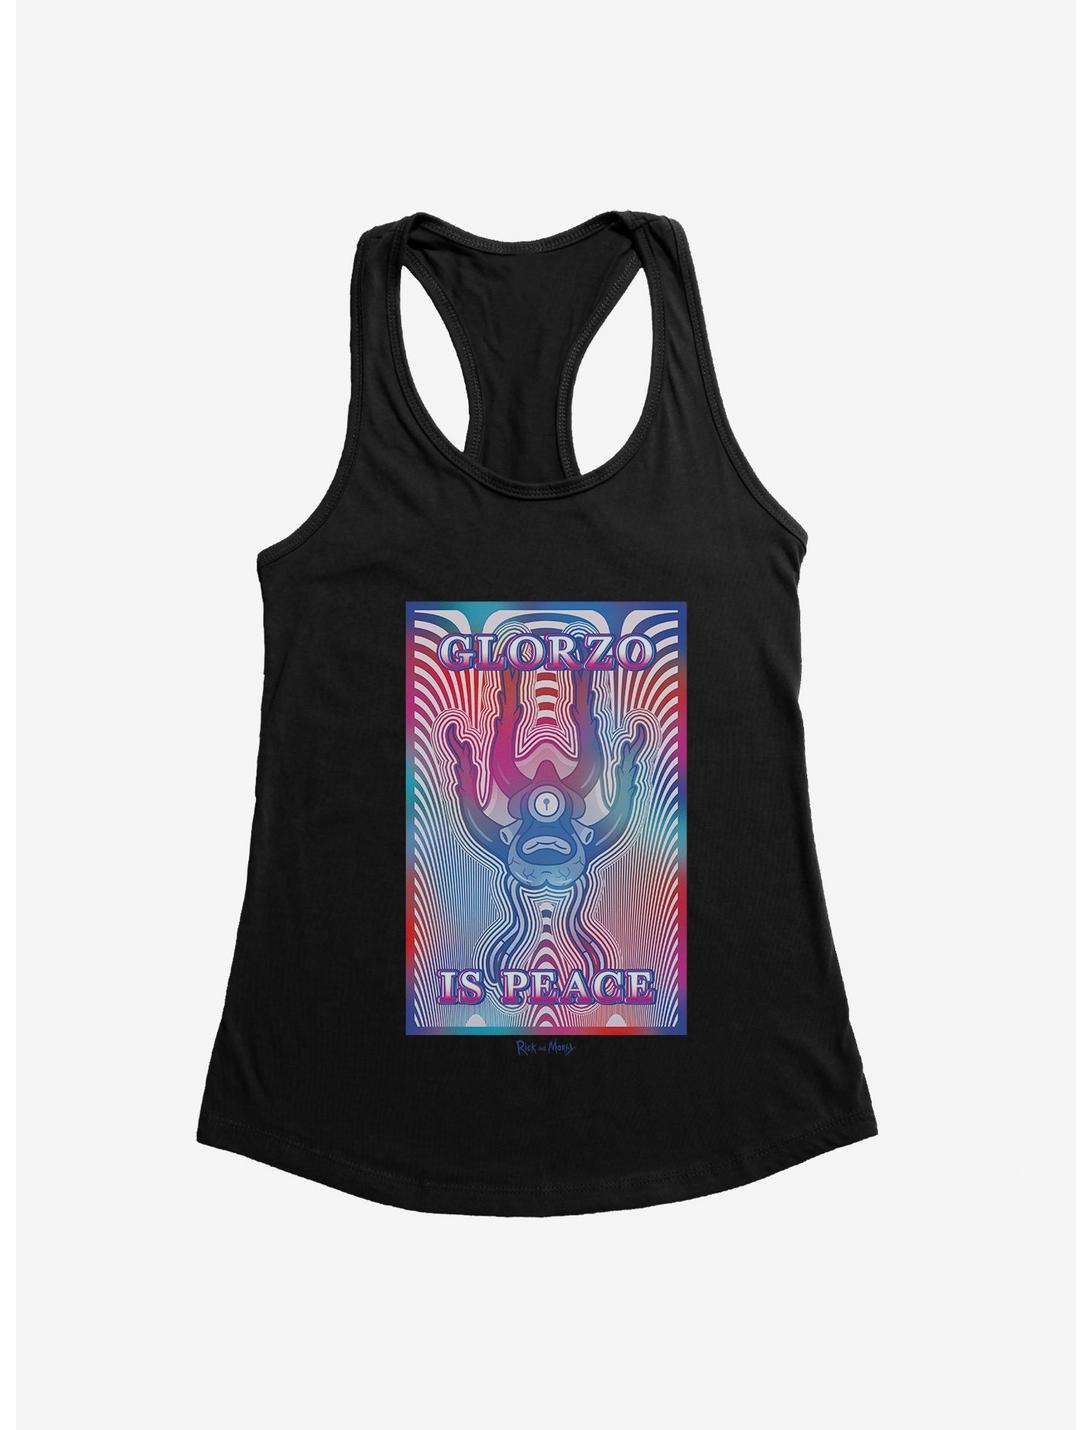 Rick And Morty Glorzo Is Peace Psychedelic Womens Tank Top, , hi-res